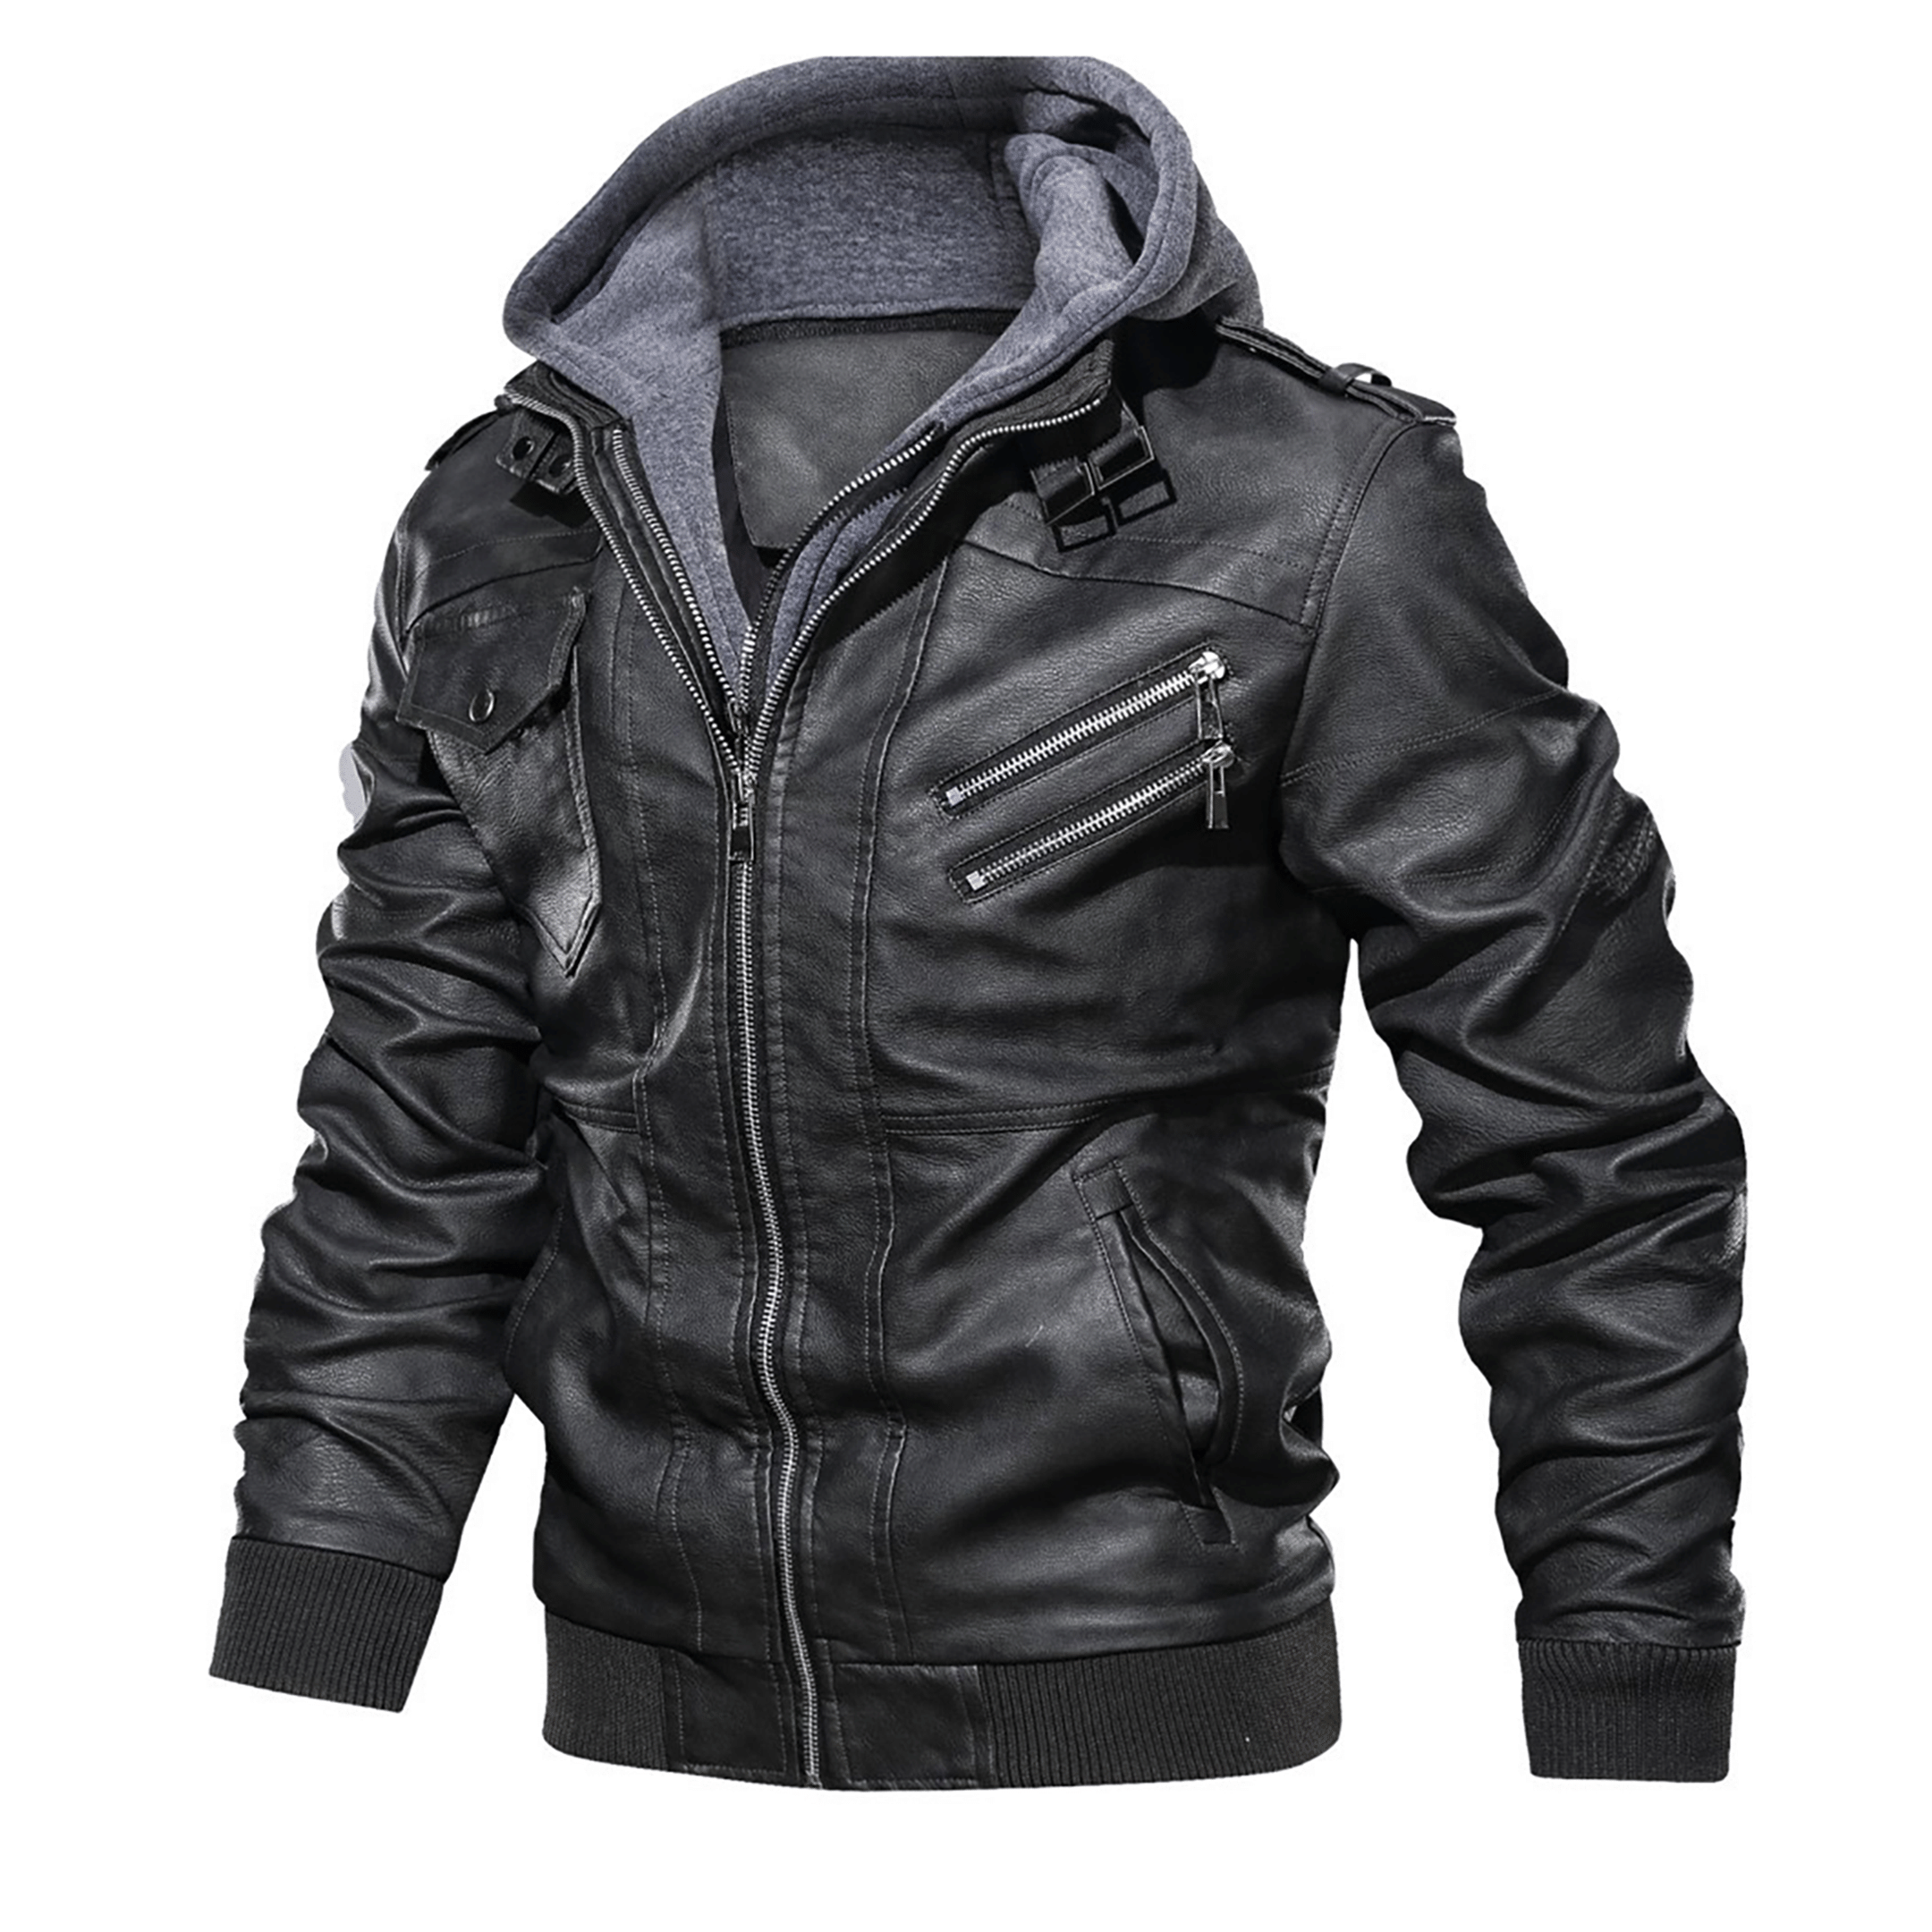 Top leather jackets and latest products 109